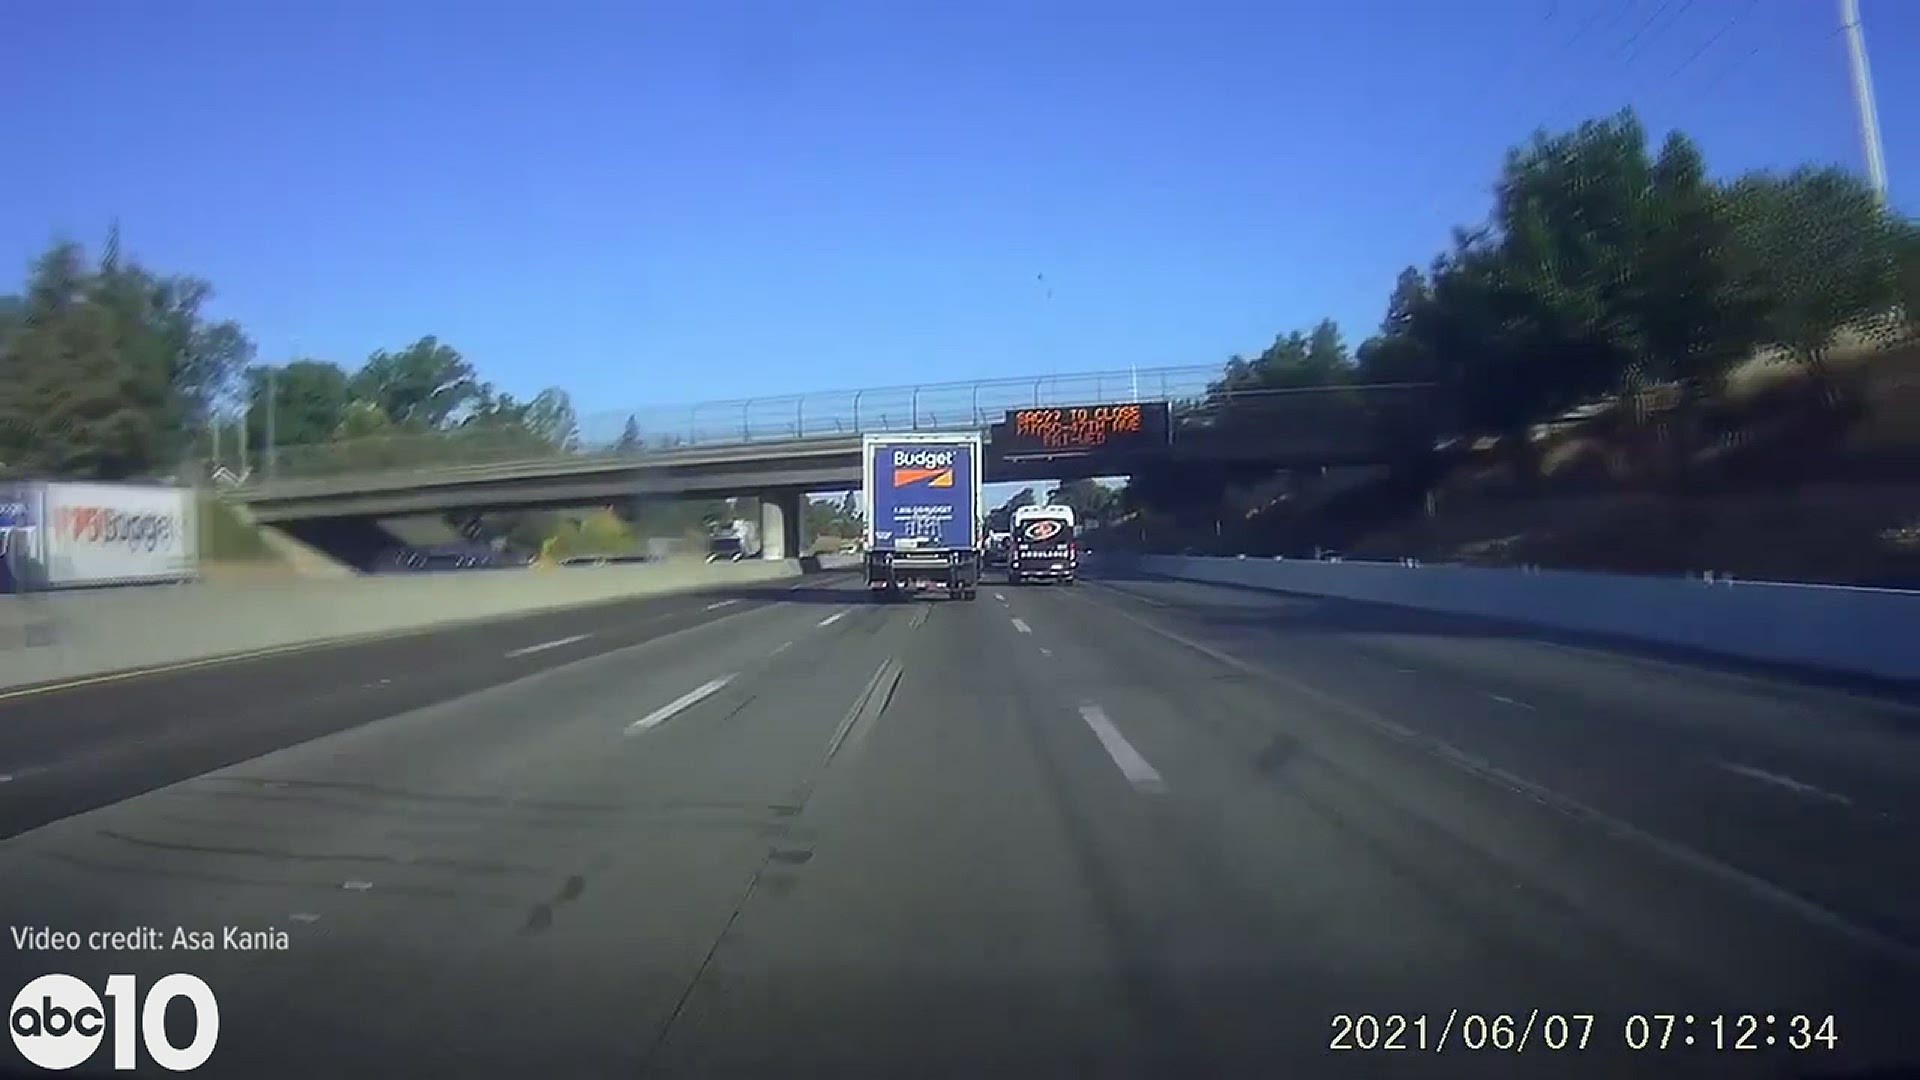 Asa Kania was driving along Hwy. 50 Monday morning and captured the moment a private ambulance crashed into a truck with their dash camera.